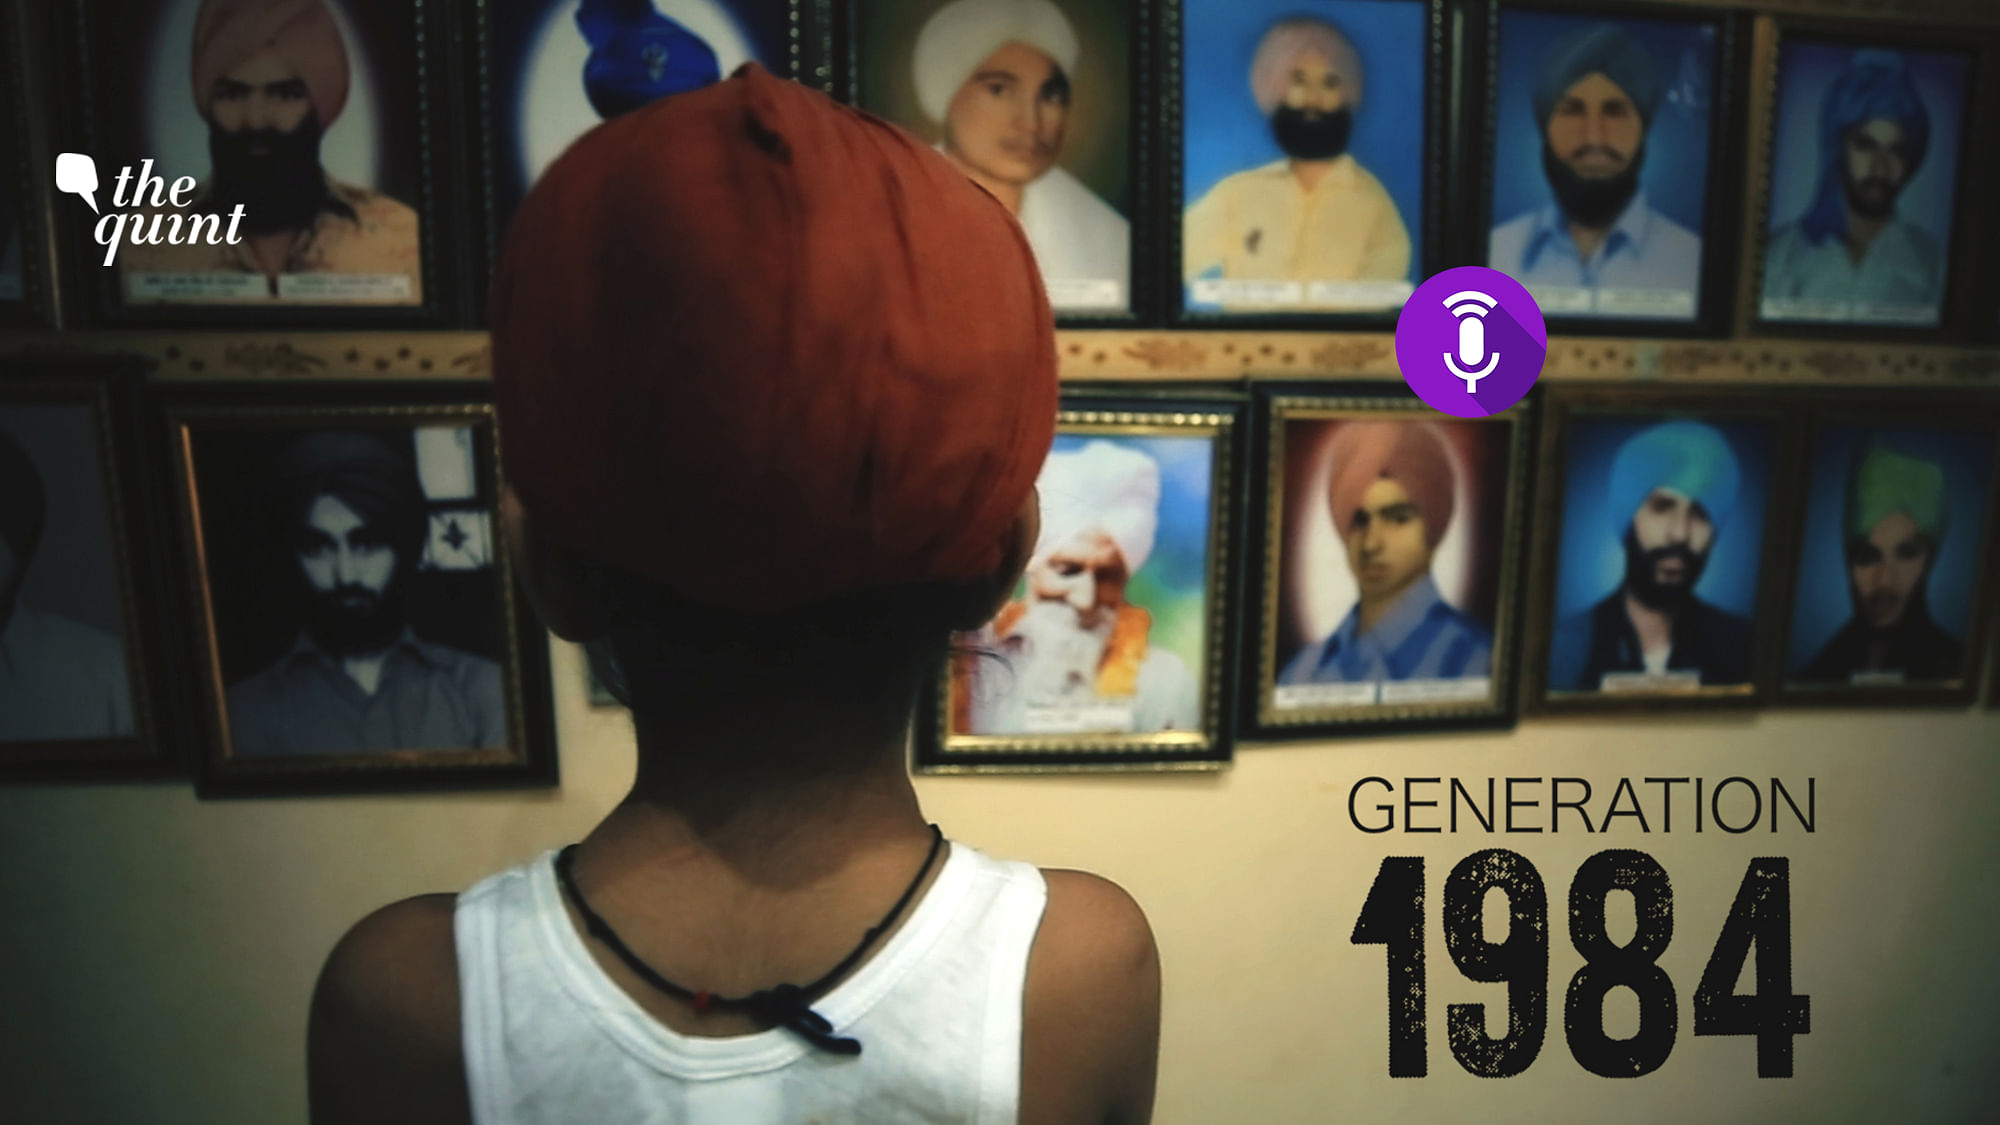 This is the story of those who were children when the anti-Sikh riots of 1984 broke out, the ones who survived the attacks, but carry the emotional and mental wounds to this day.